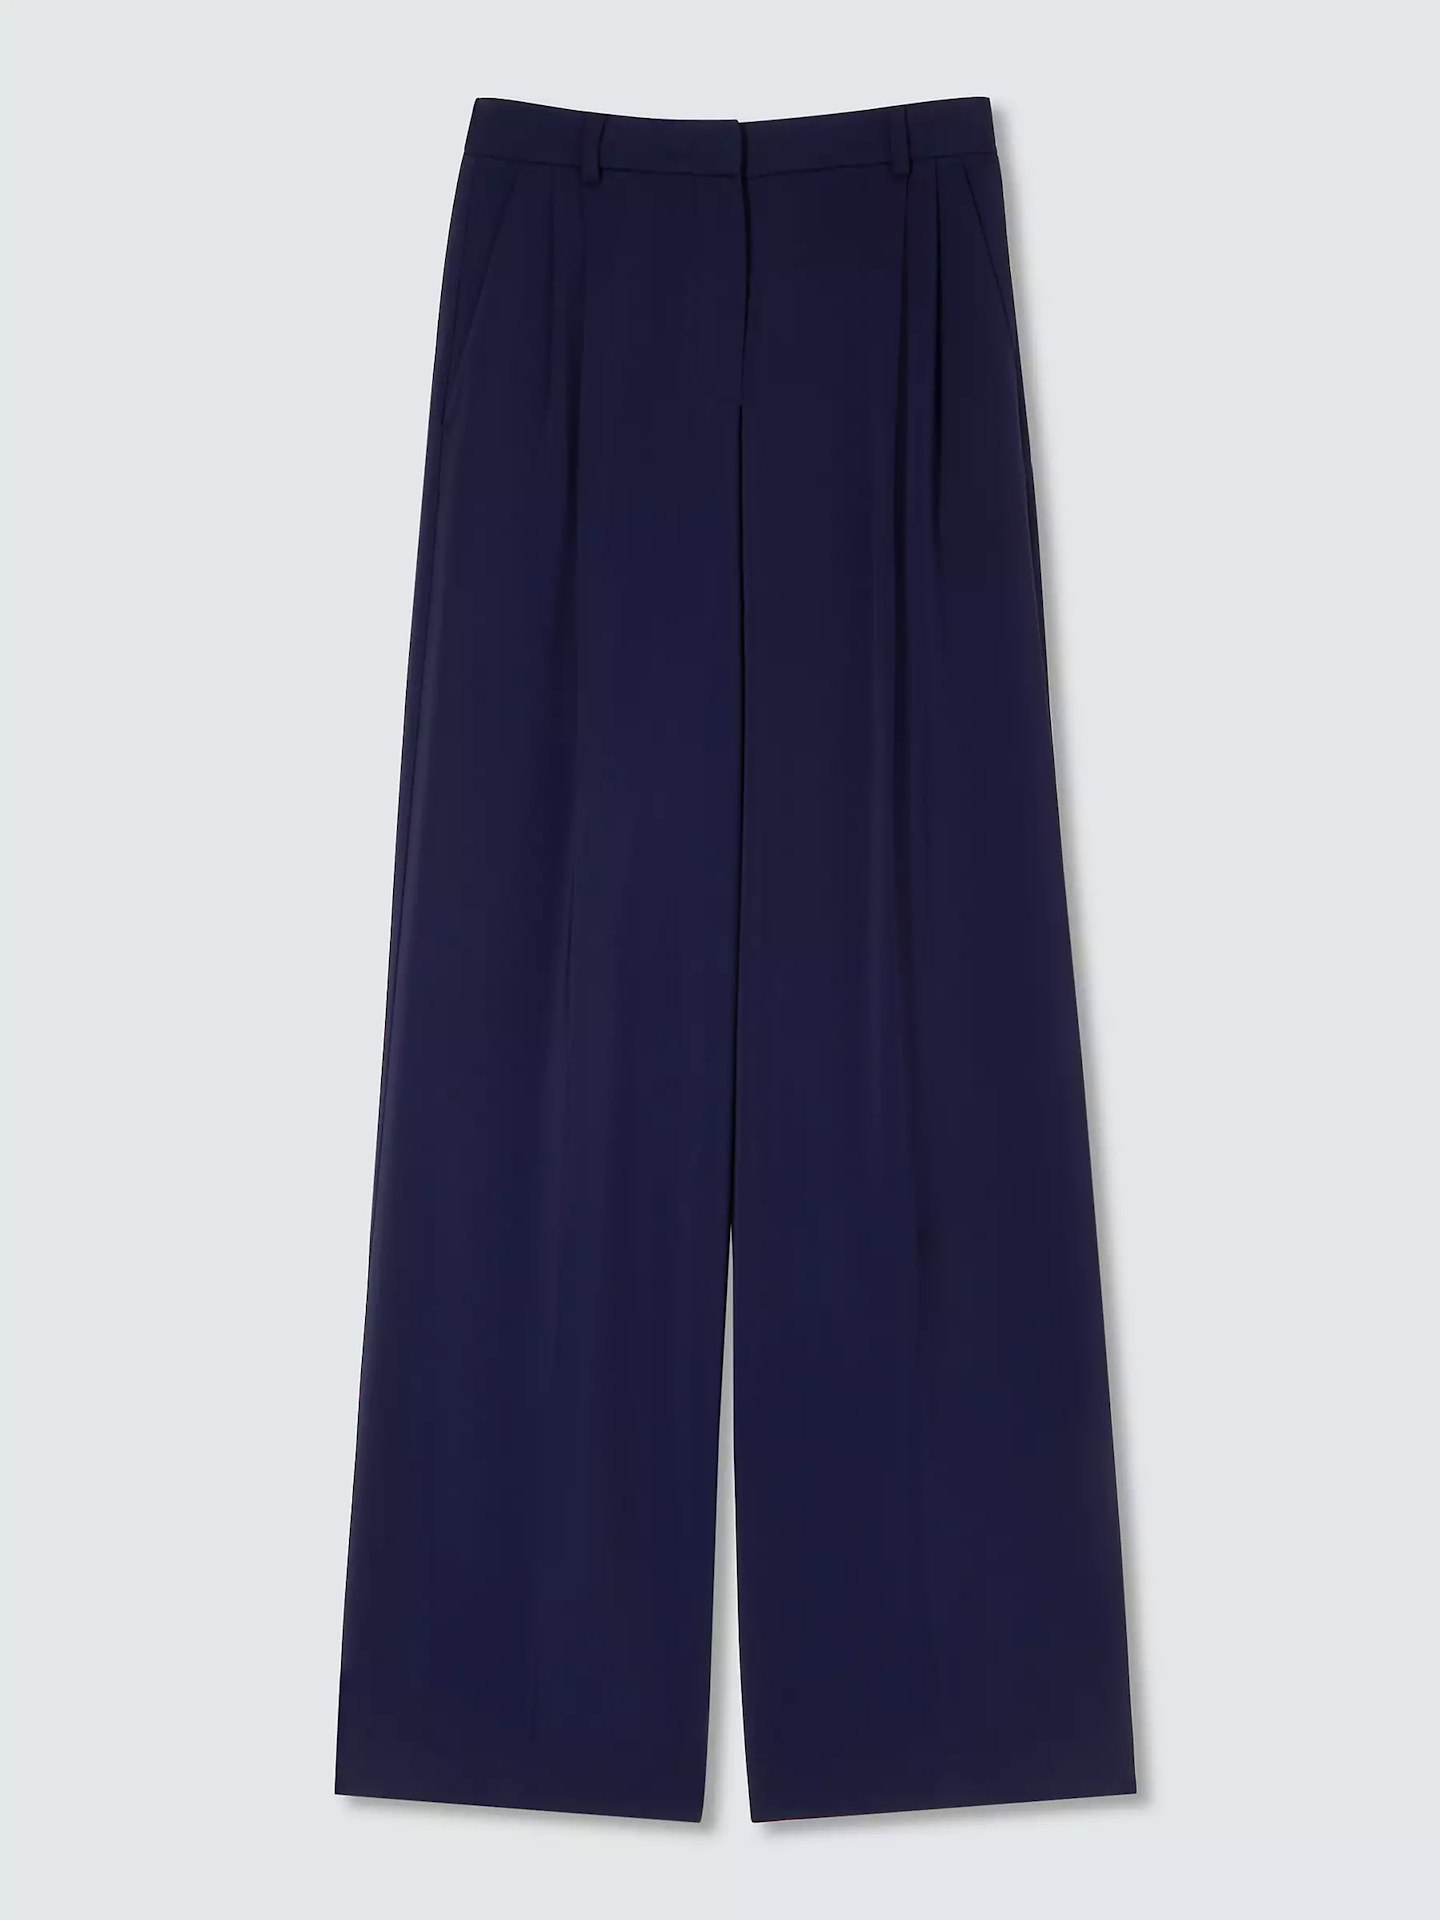 vivere navy trousers